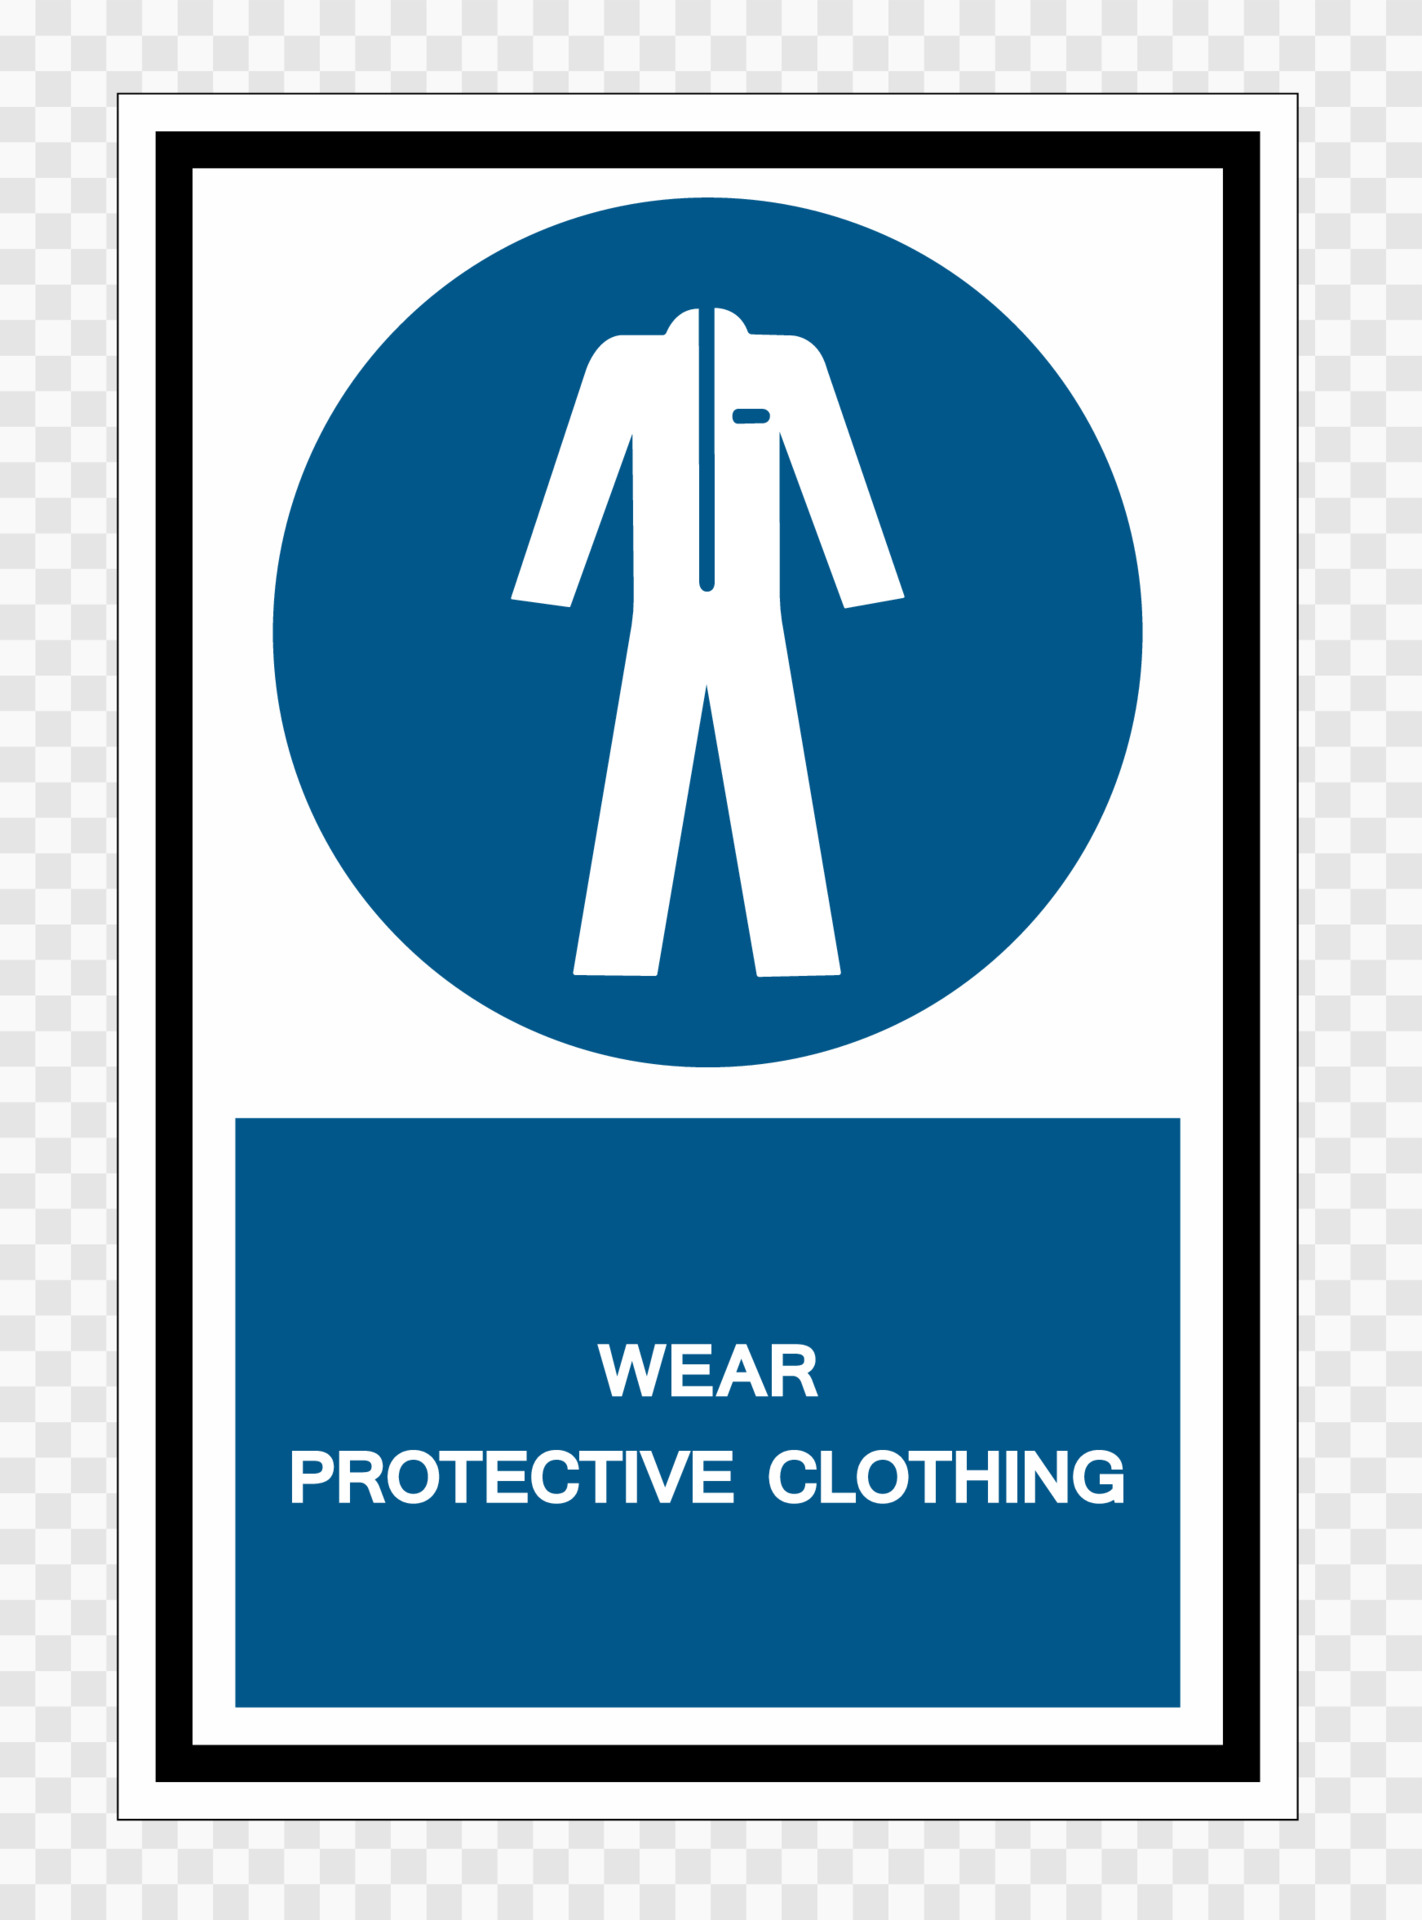 Wear Protective Clothing Symbol Sign Isolate on transparent